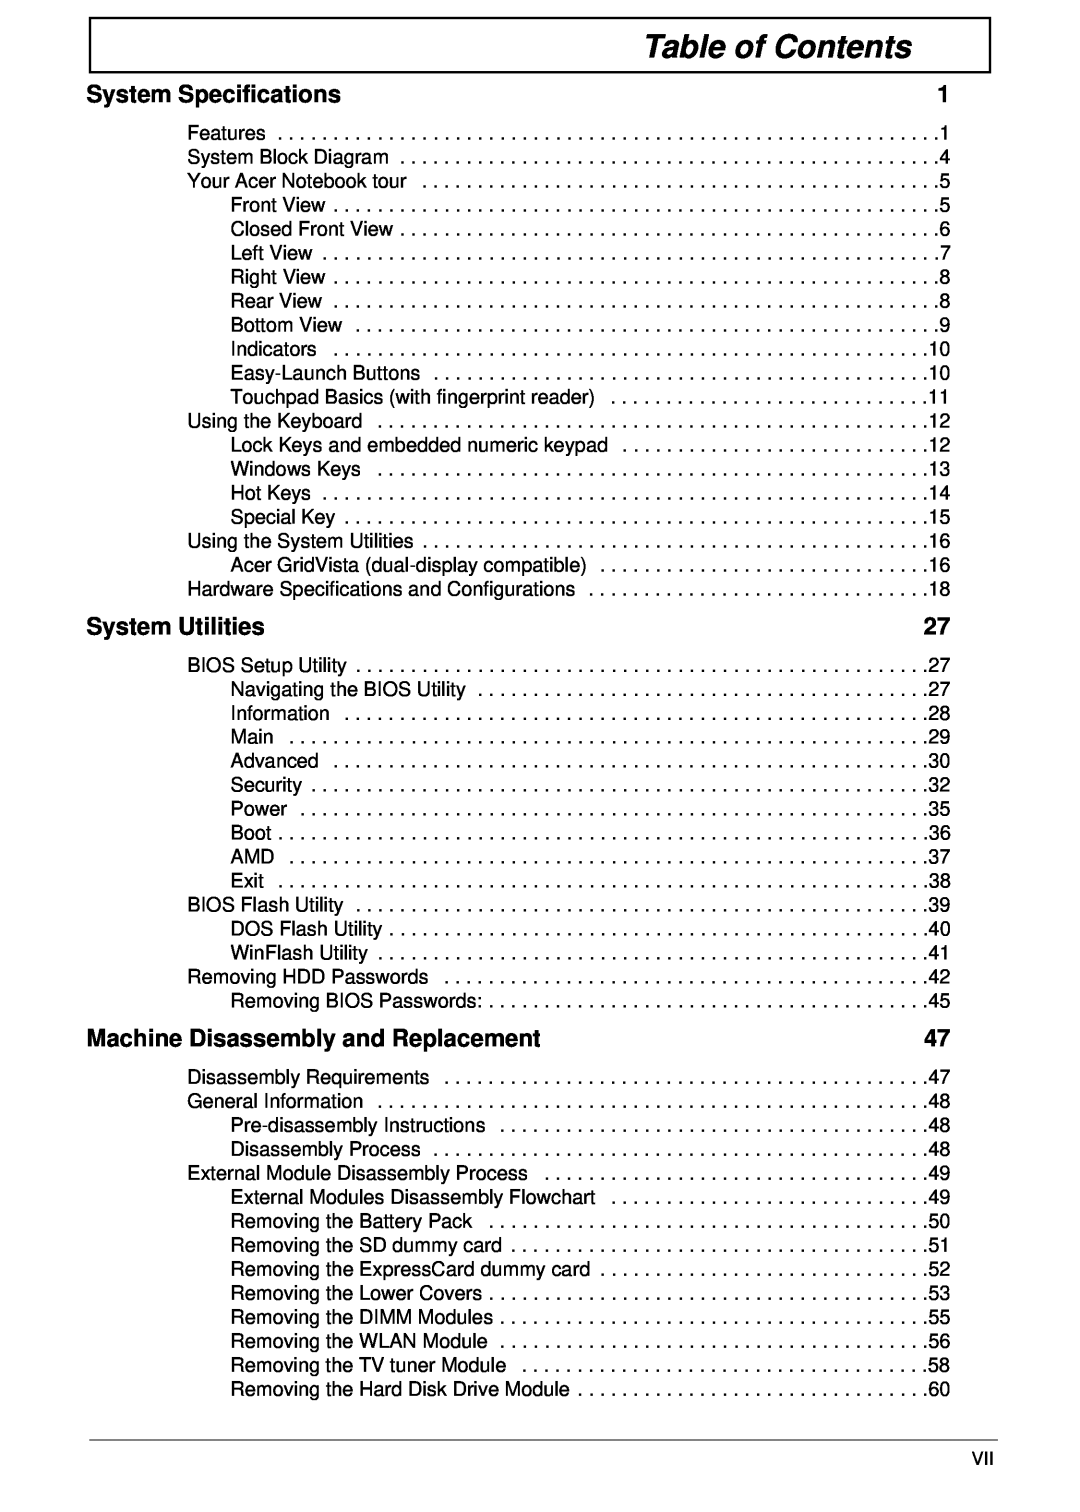 Acer 5530G manual Table of Contents, System Specifications, System Utilities, Machine Disassembly and Replacement 